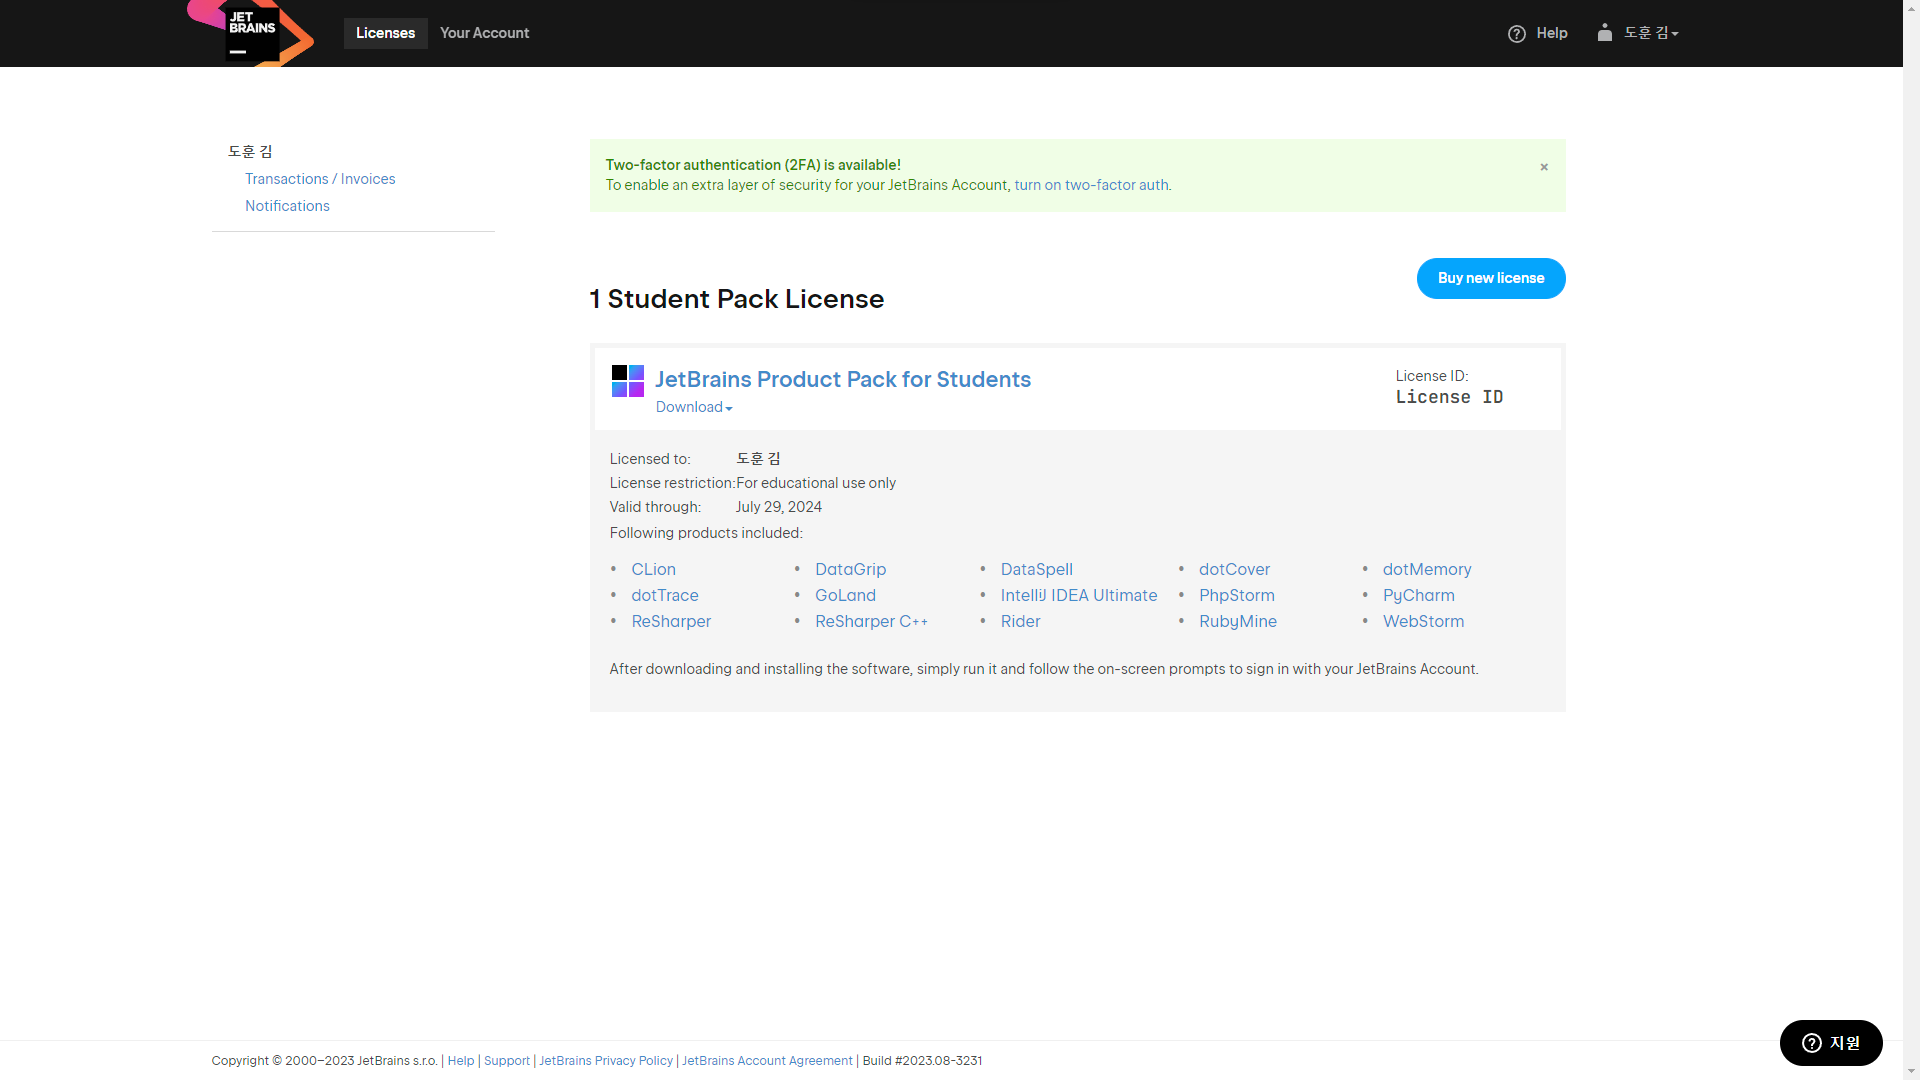 JetBrains Product Pack for Students License